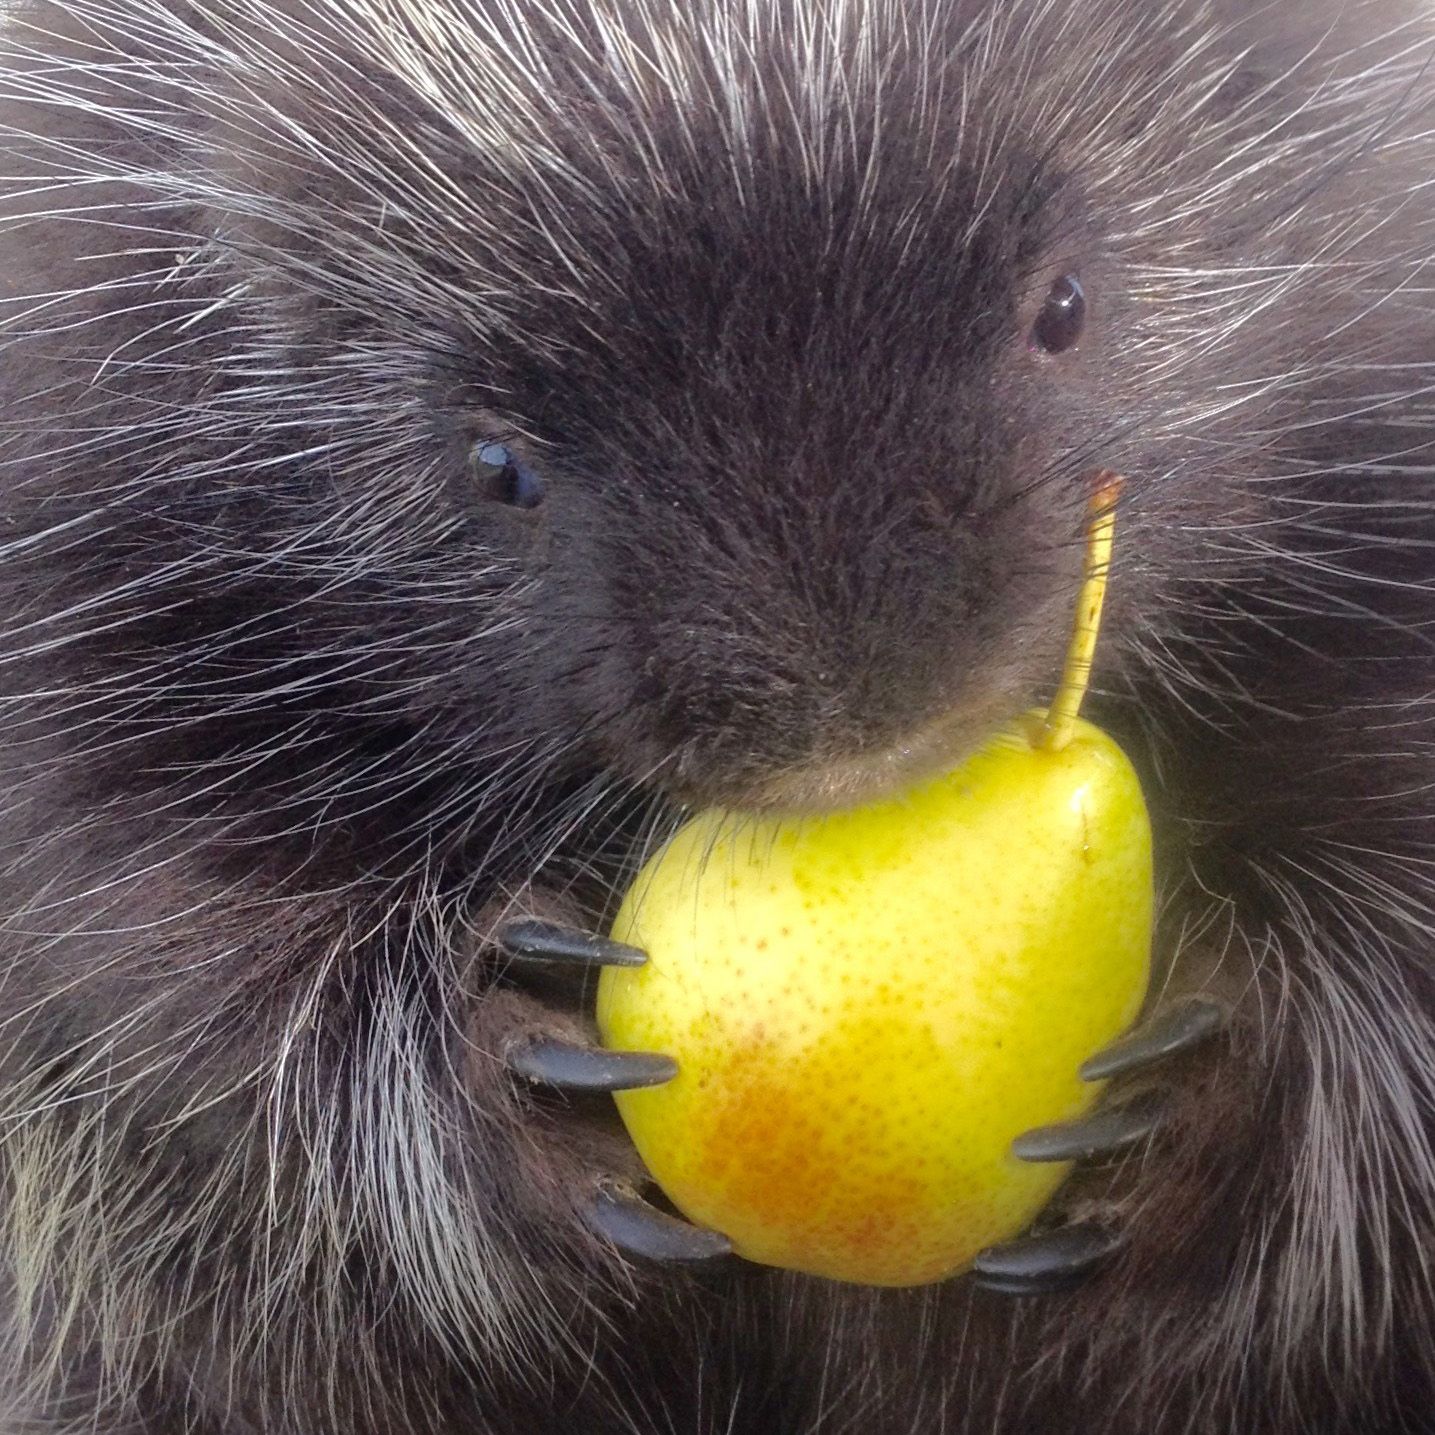 close up of porcupine clutching a pear